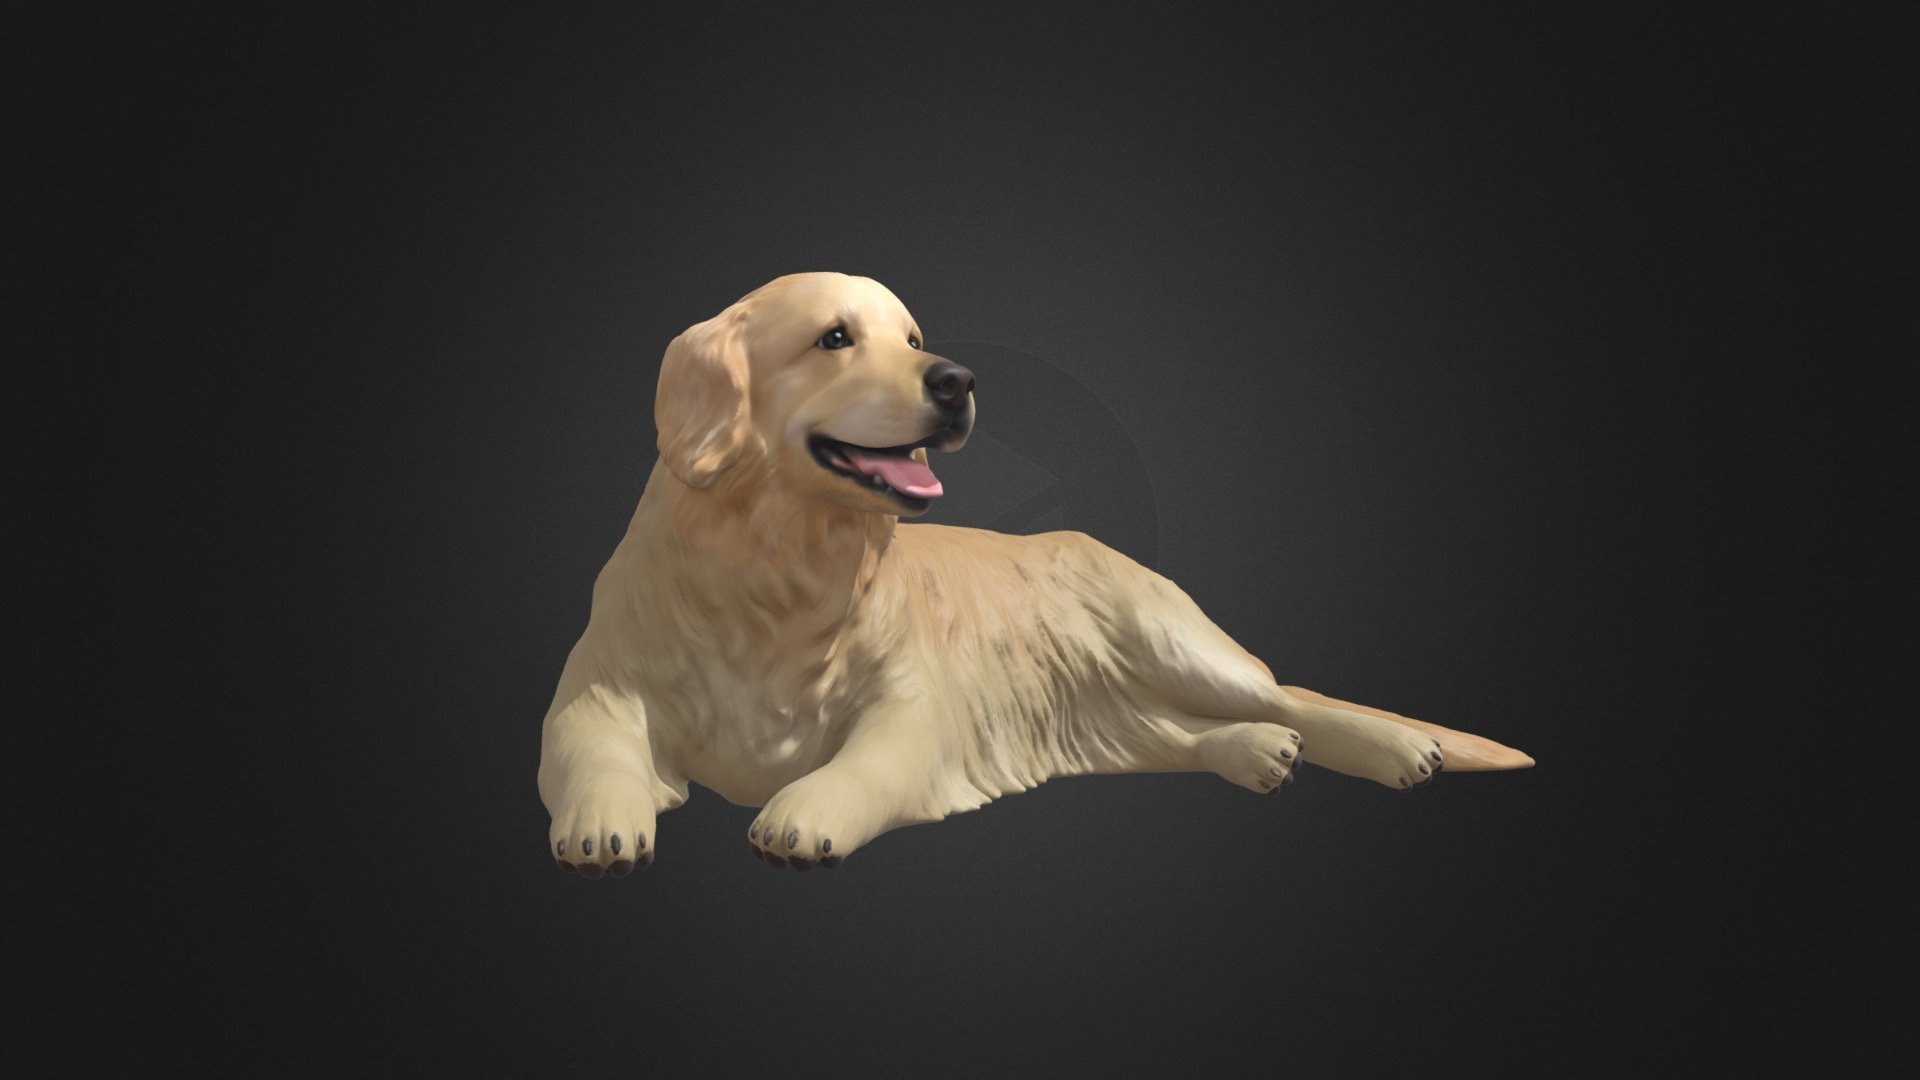 Seed by mi custom made Golden Retriever figurine.

Interested to order custom made figurine?  Please visit our online store, facebook page or instagram 3d model